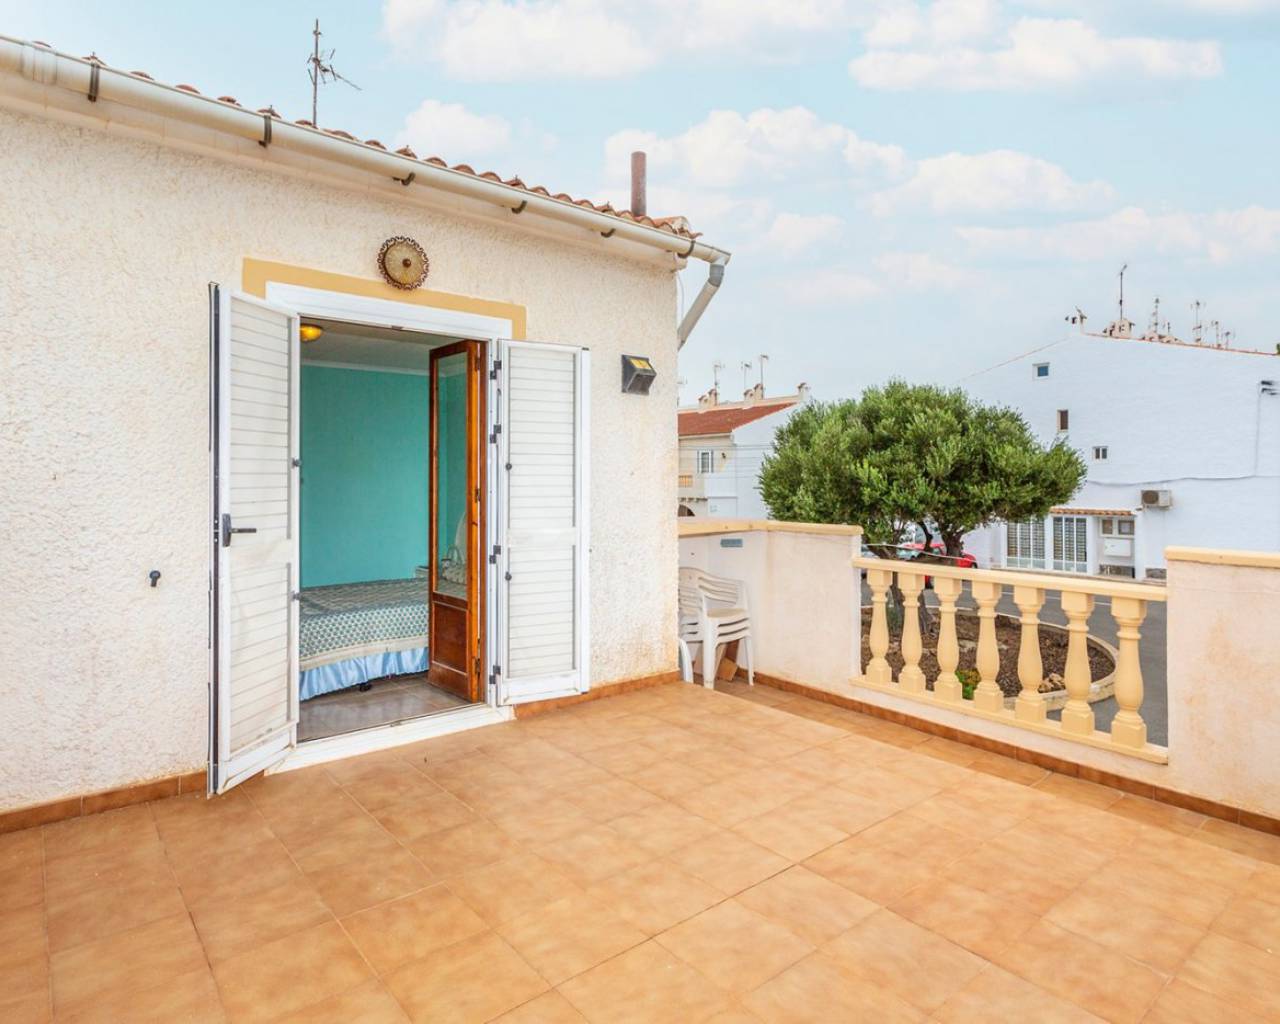 Sale - Maison mitoyenne - Torrevieja - Torre del moro